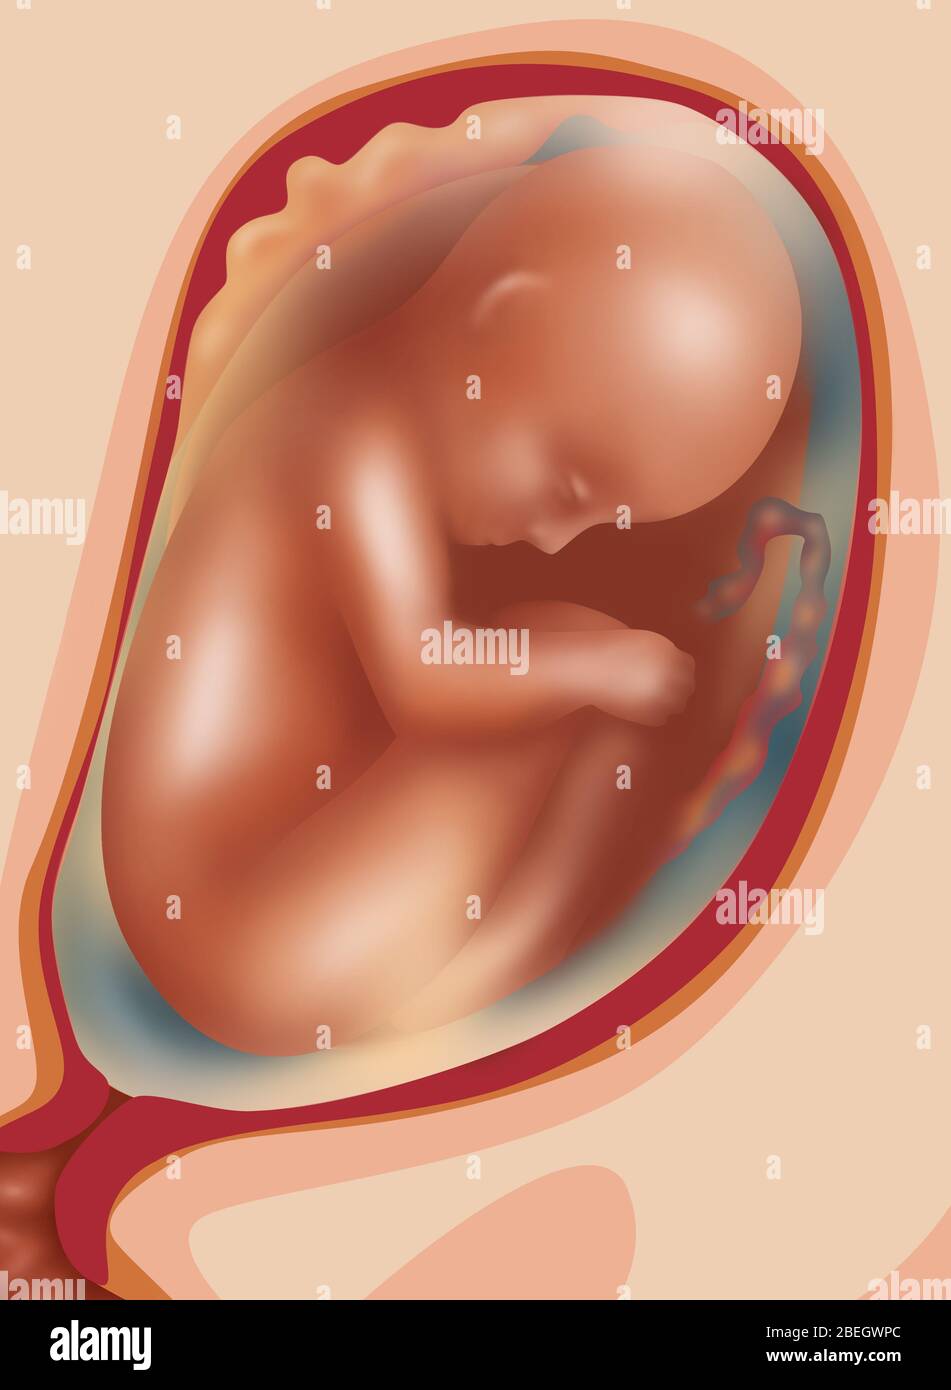 Fetal Growth - Month 7 Stock Photo